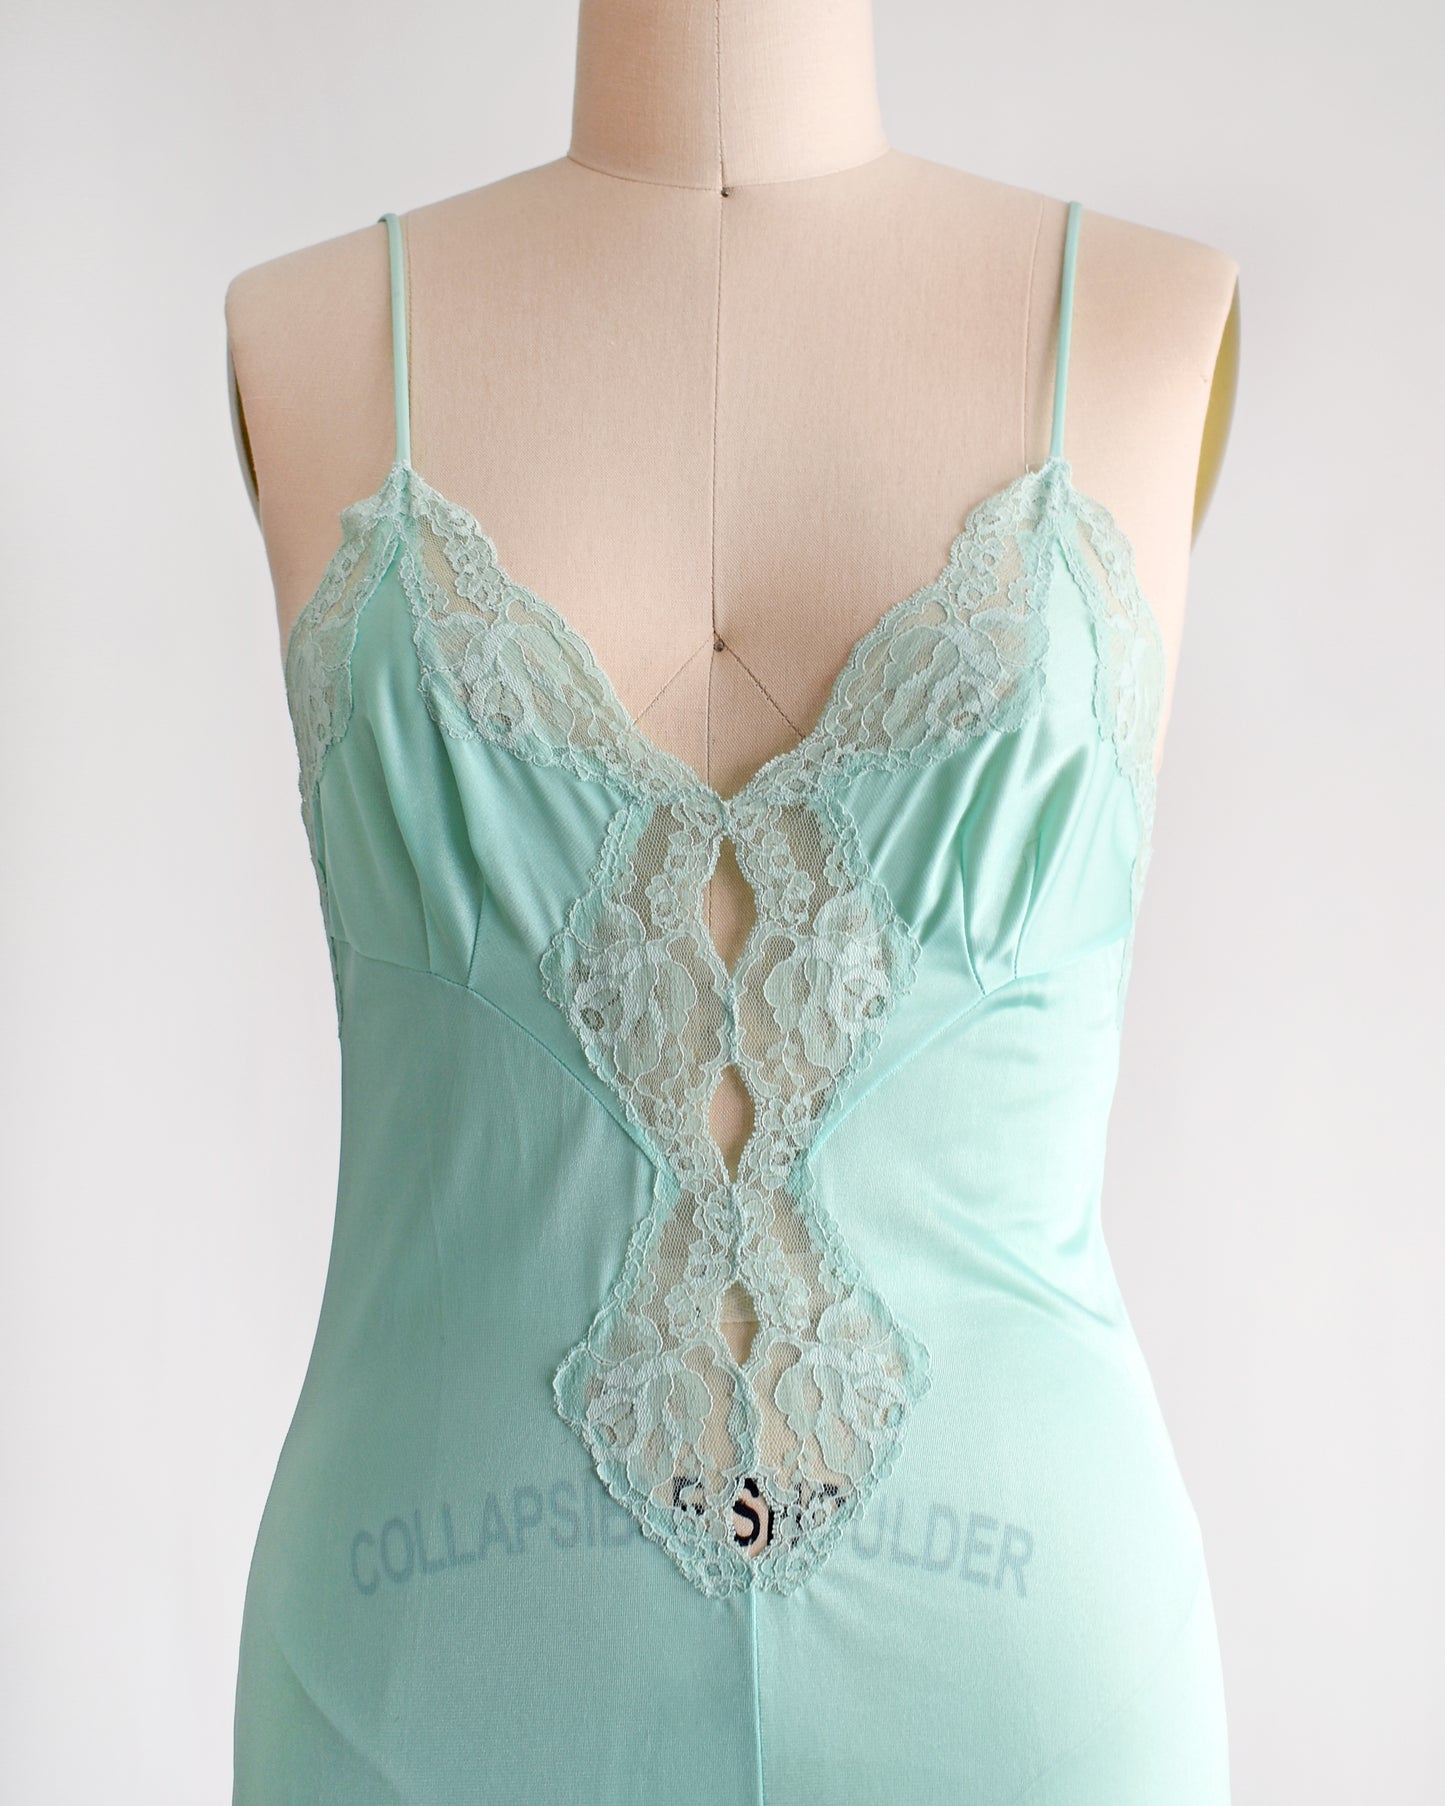 Close up of the bodice which shows the lace detail